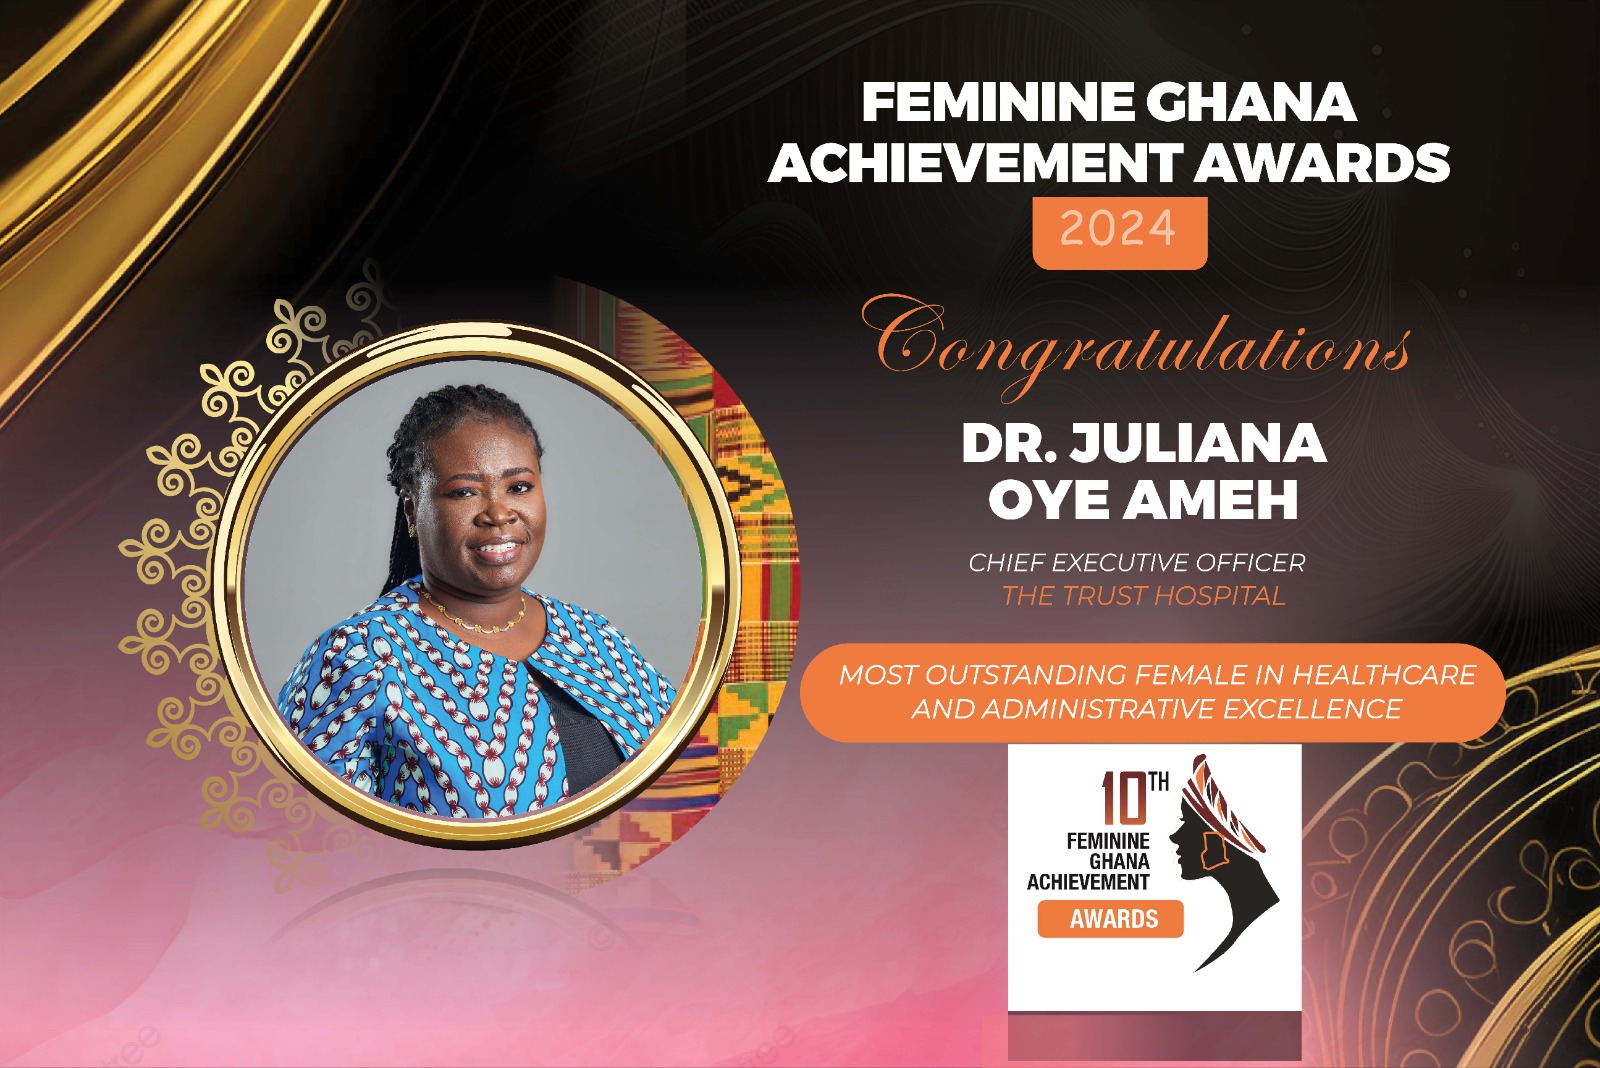 Trust Hospitals’ CEO, Dr. Juliana Ameh crowned Ghana’s Most Outstanding Female in Healthcare